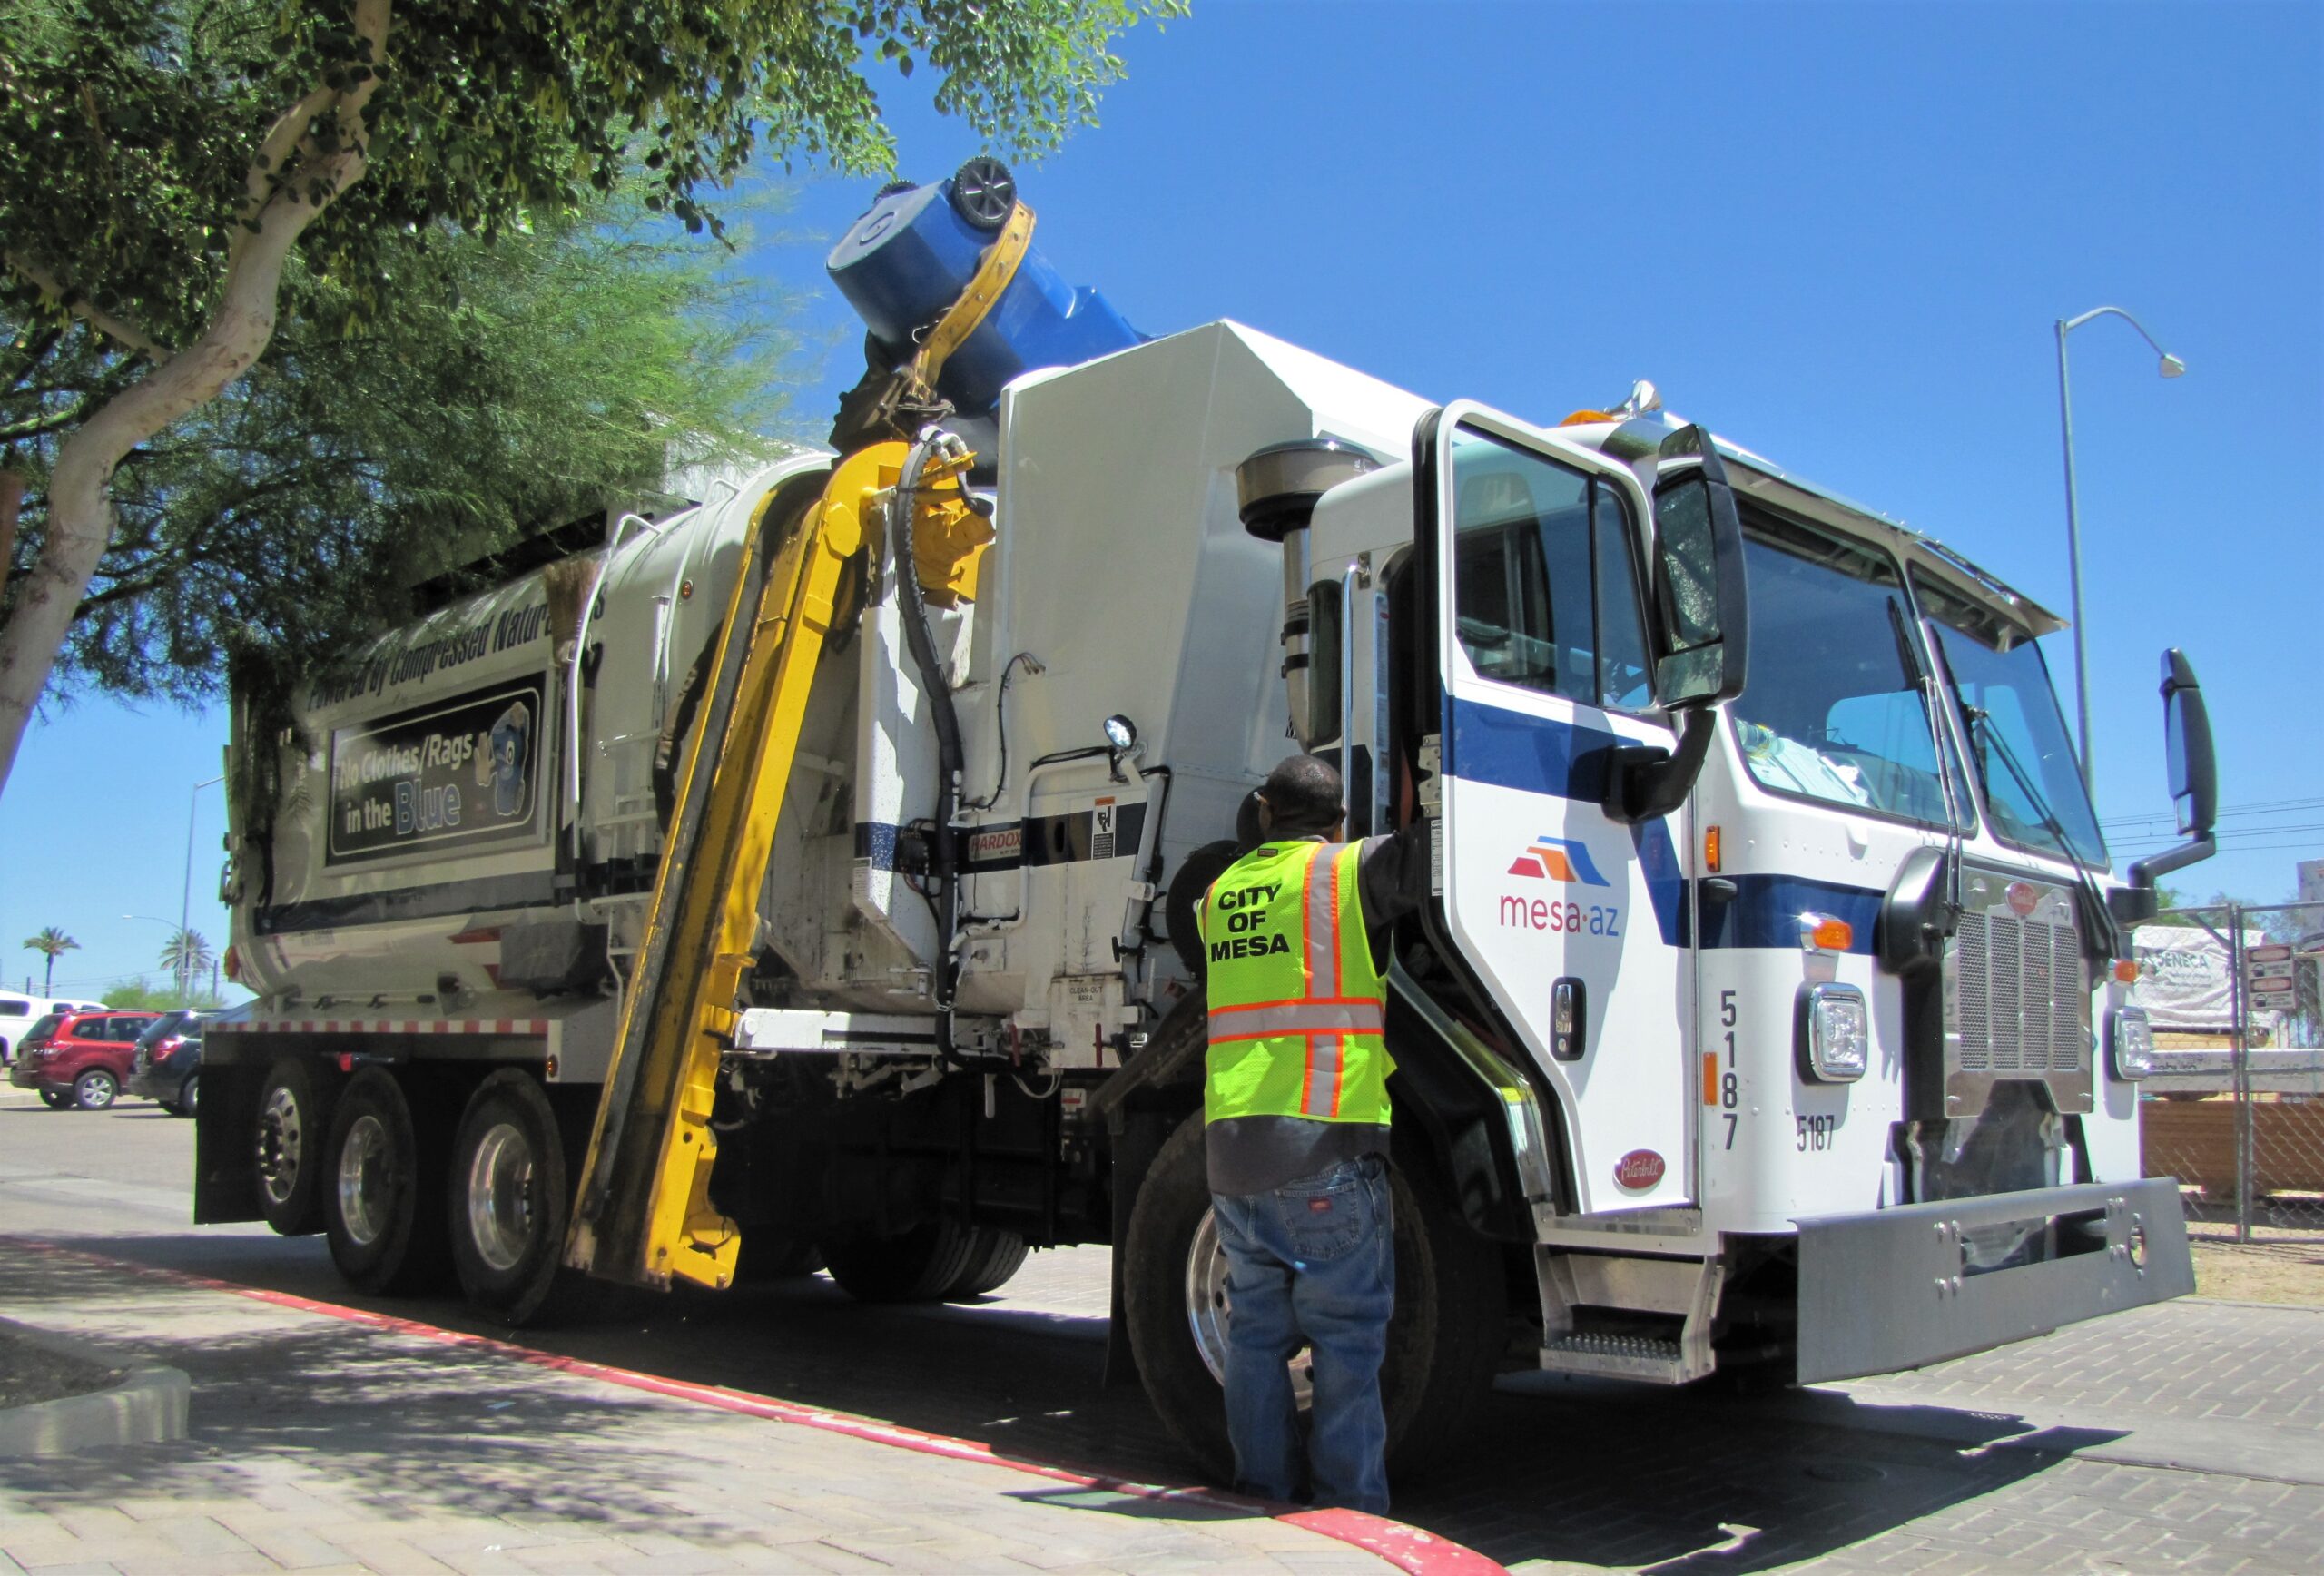 How China, COVID-19 and a structural fire crippled Mesa’s recycling program